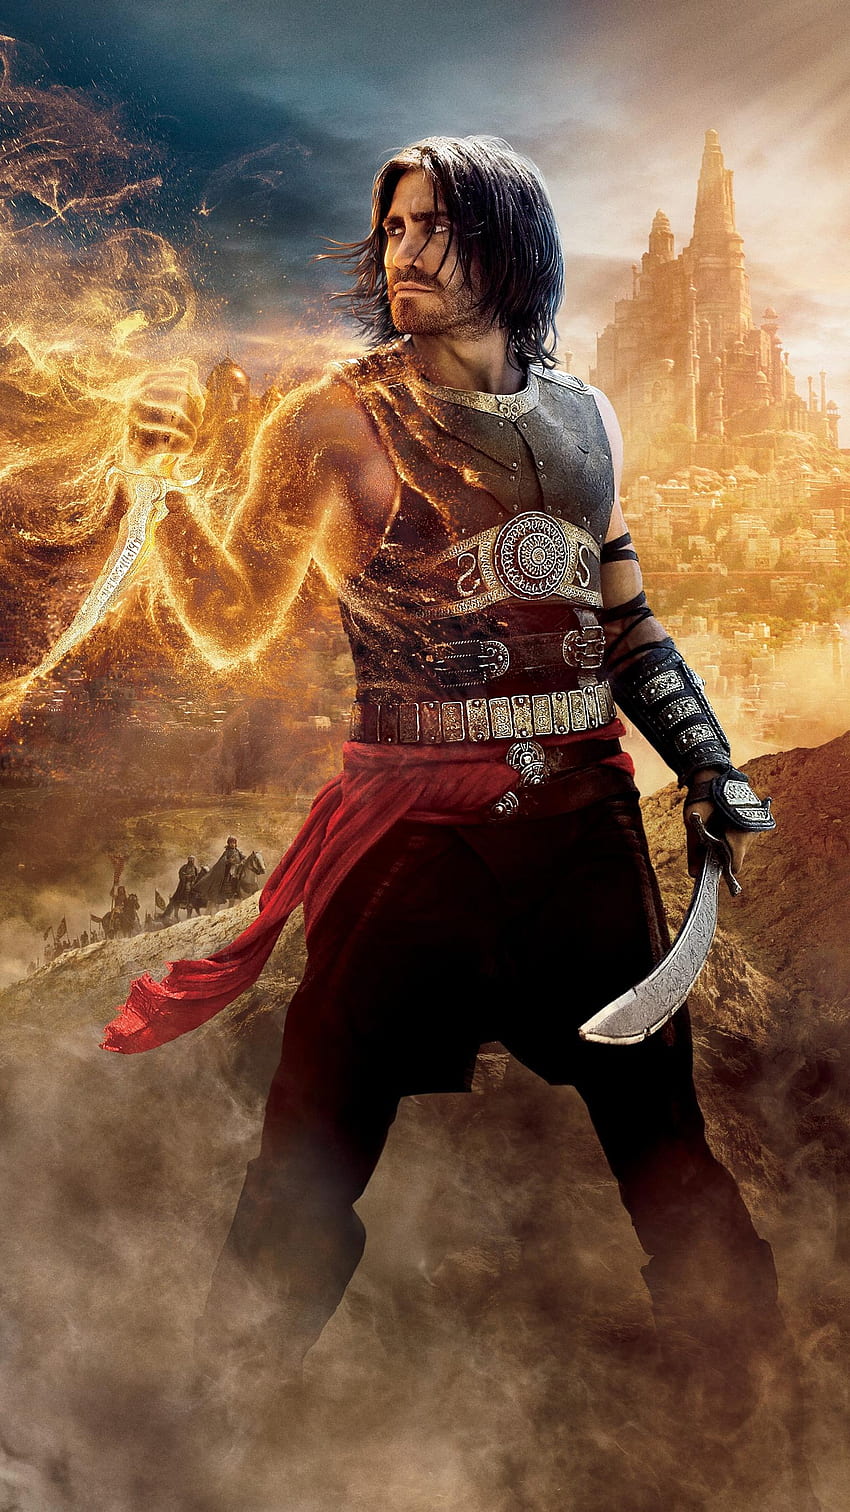 Prince of Persia: The Sands of Time (2022) movie HD phone wallpaper